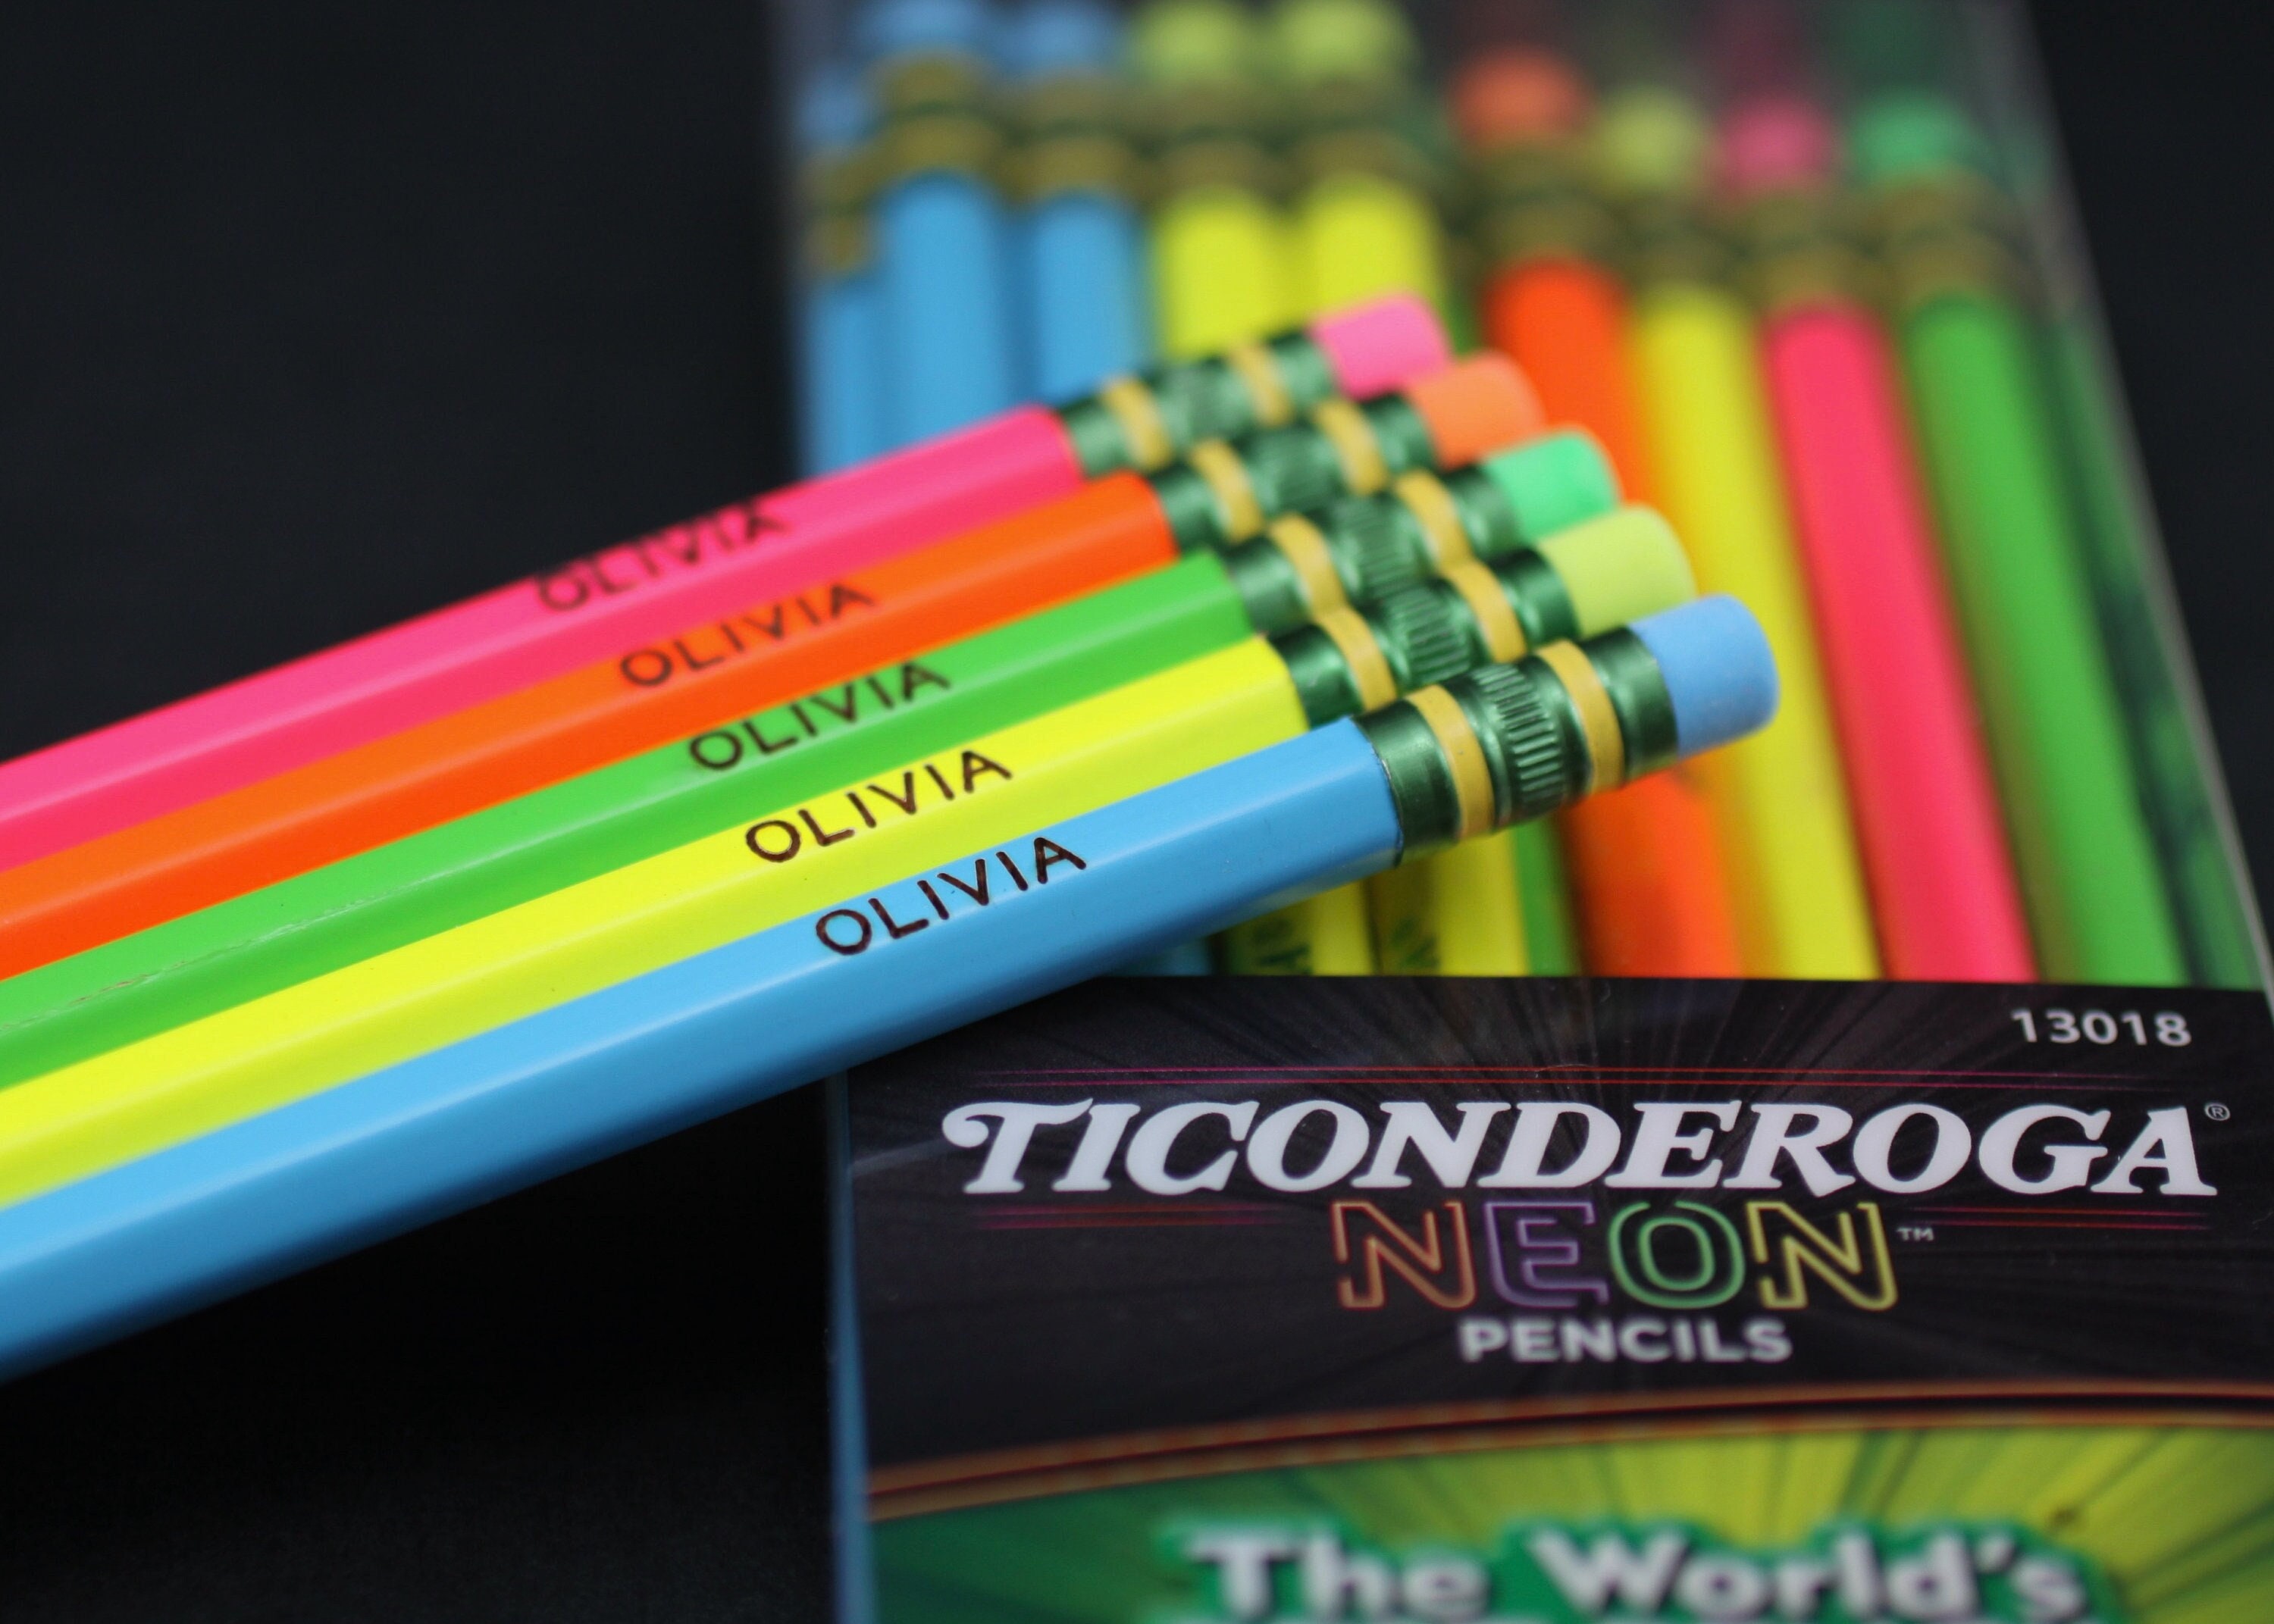 Personalized Neon 2 Pencils 10-pack or 18-pack Engraved Ticonderoga Neon  Pencils 